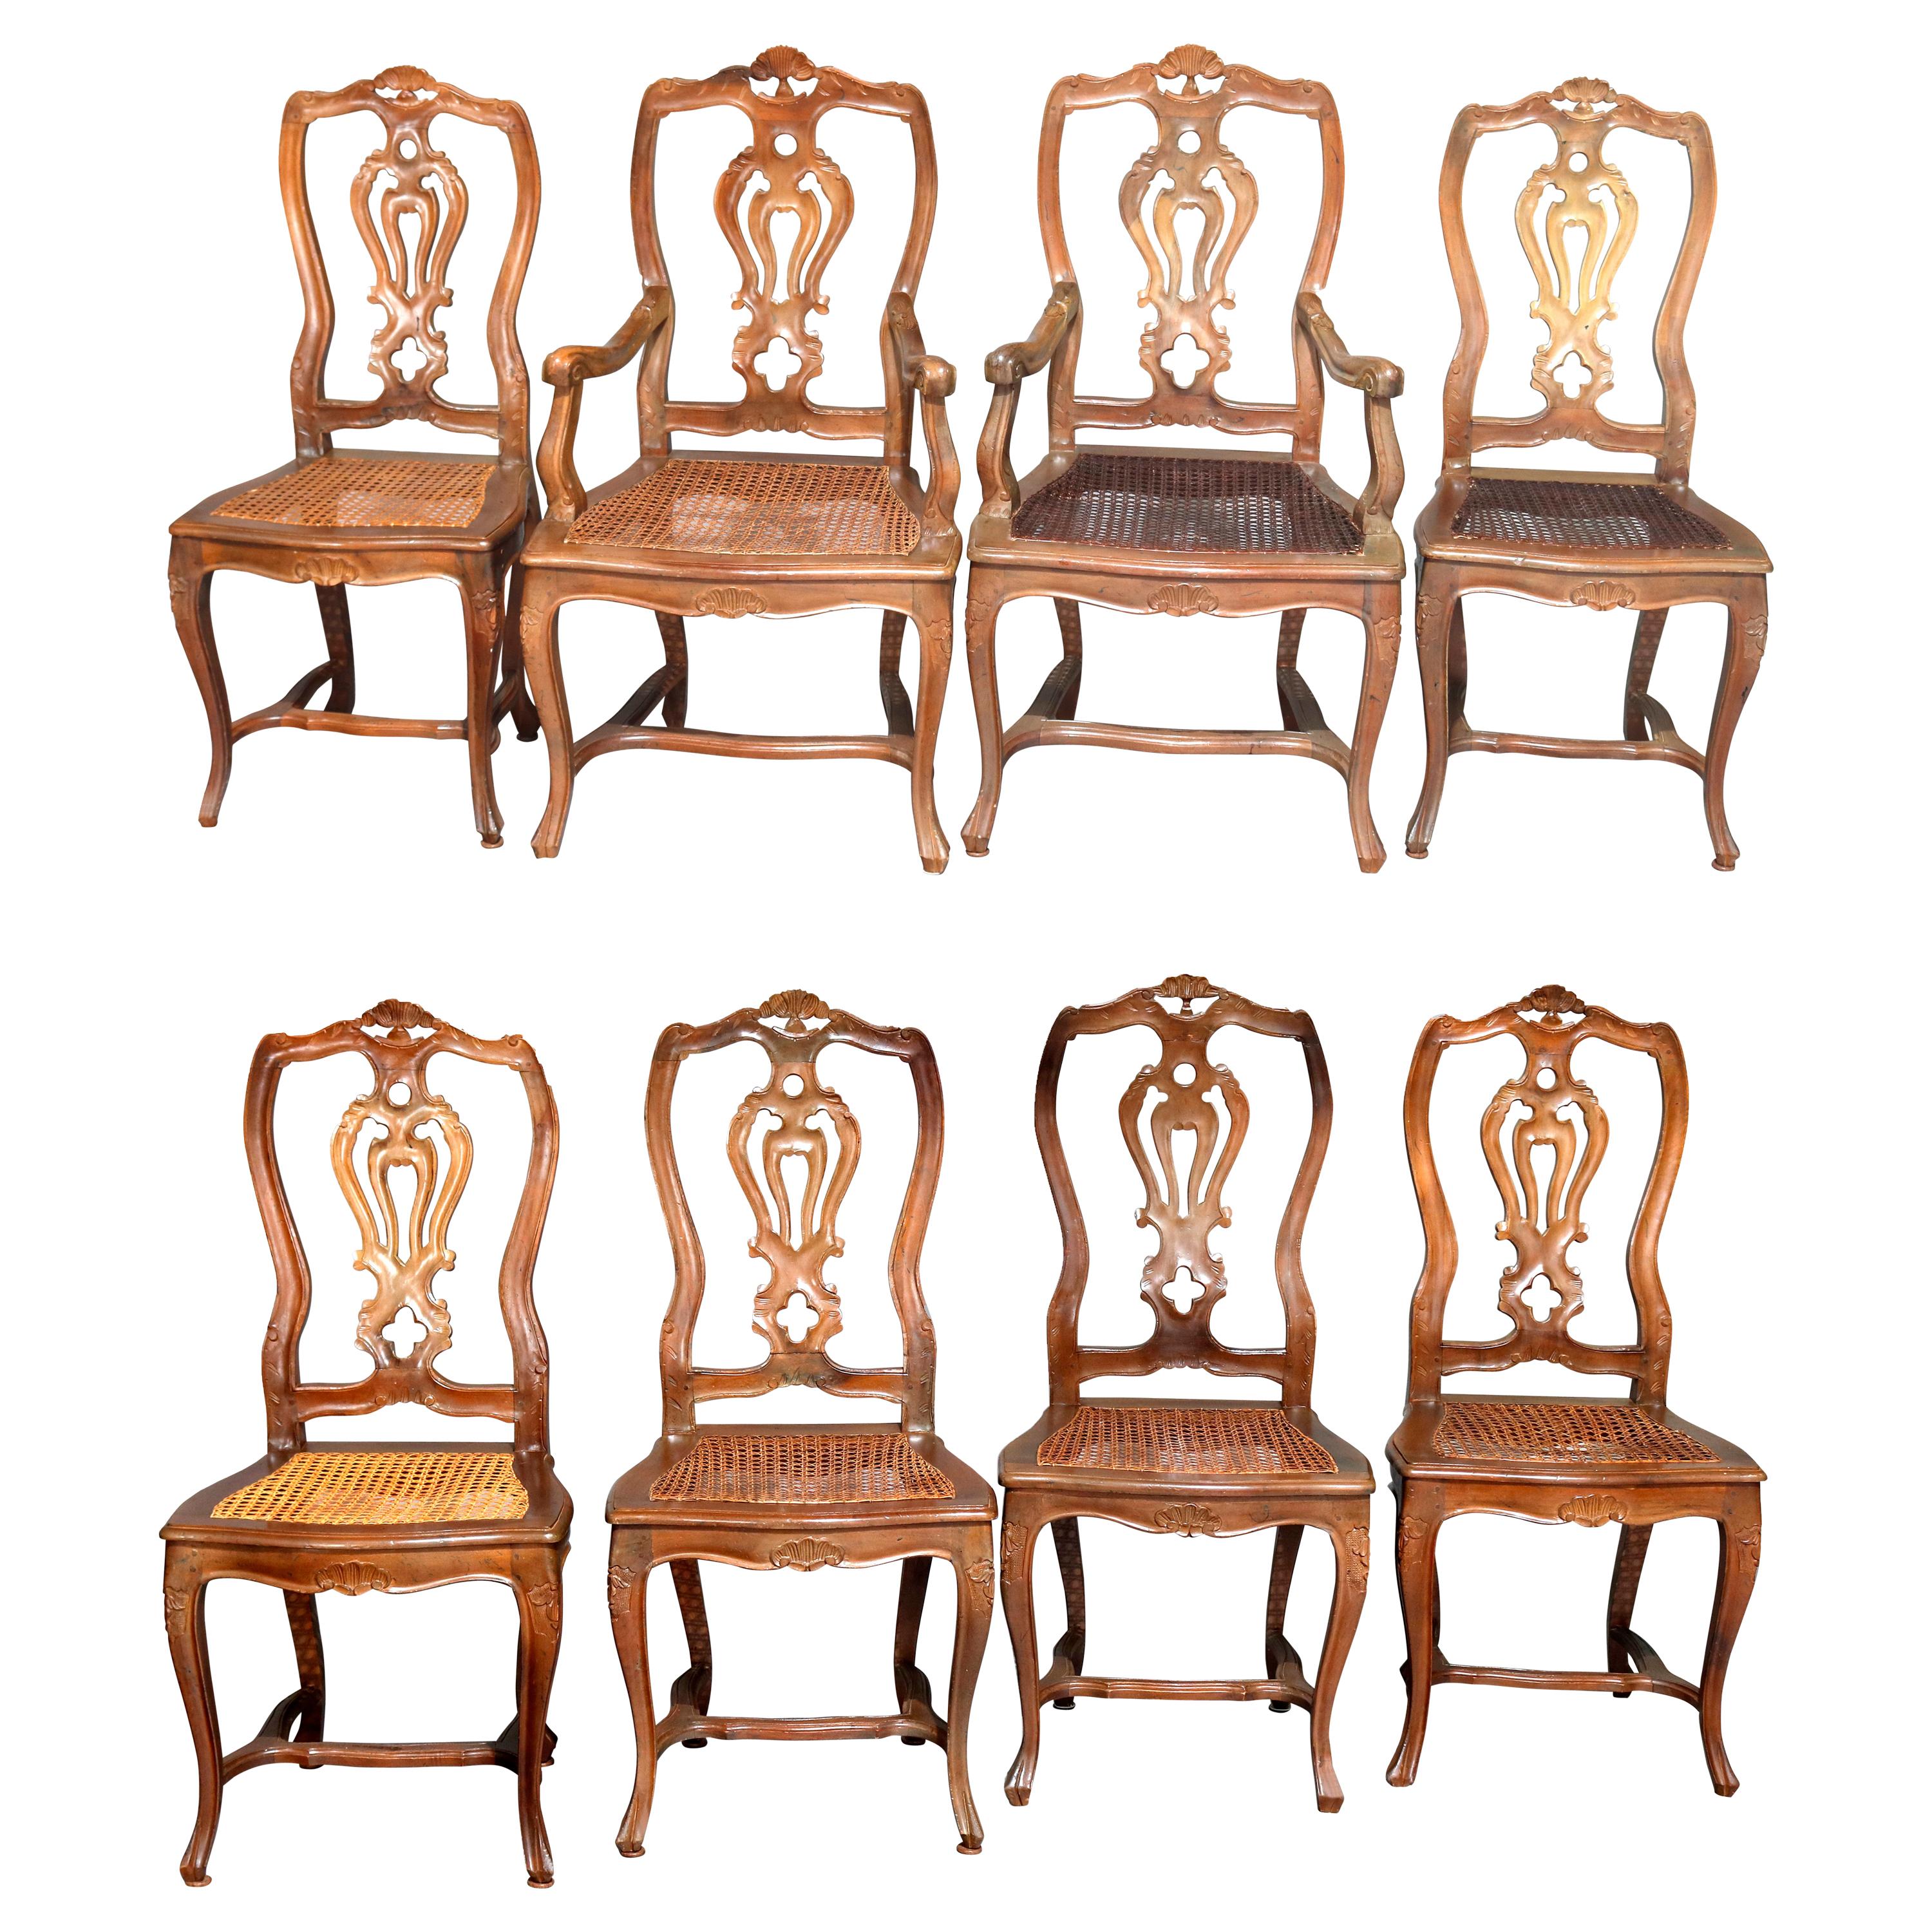 Eight Italian Renaissance Revival Carved Fruitwood and Caned Dining Chairs